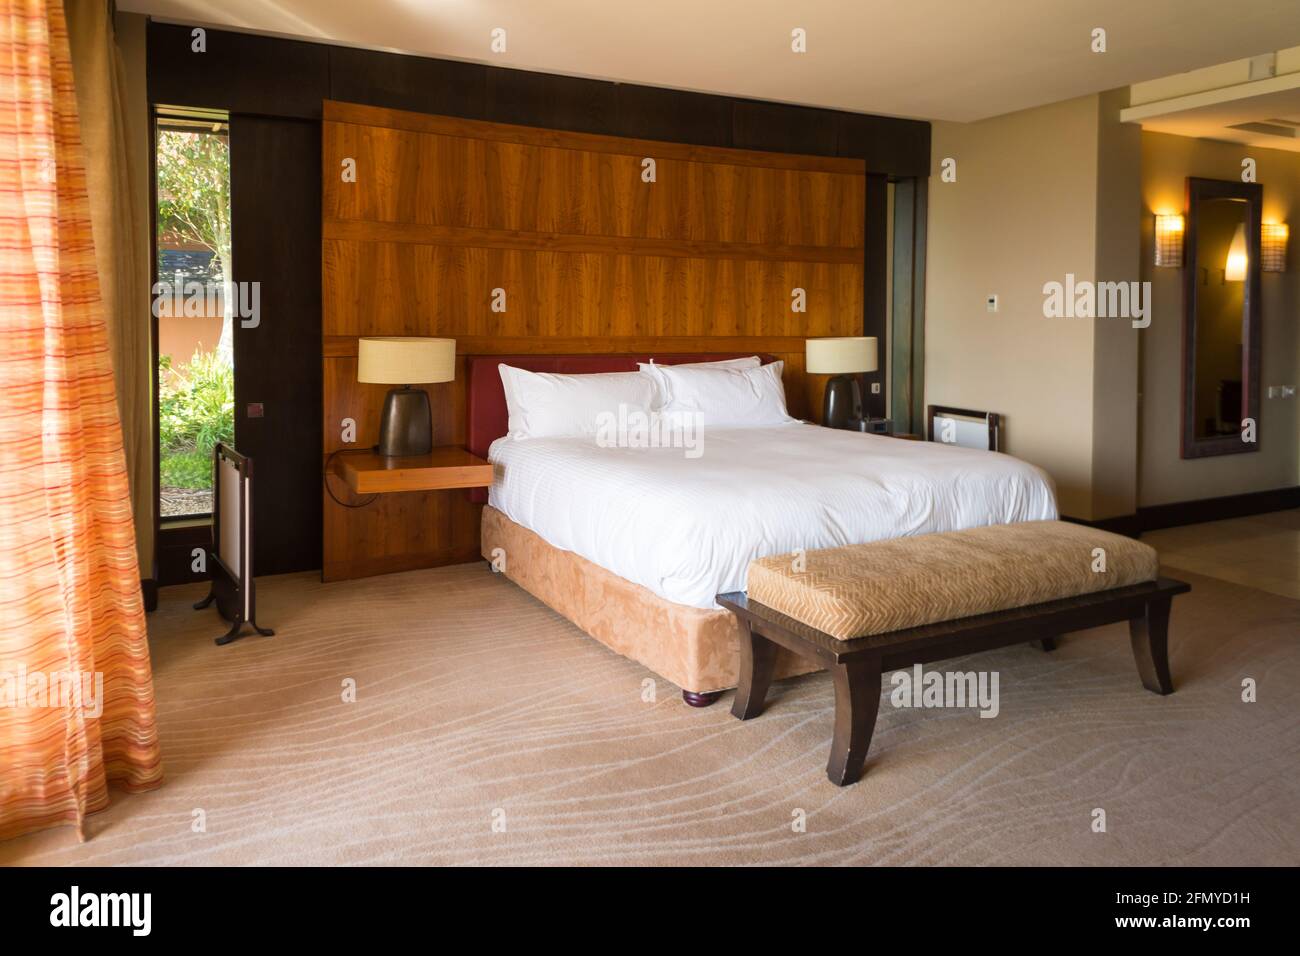 Pezula hotel bedroom suite in Knysna, South Africa concept tourism and travel accommodation Stock Photo